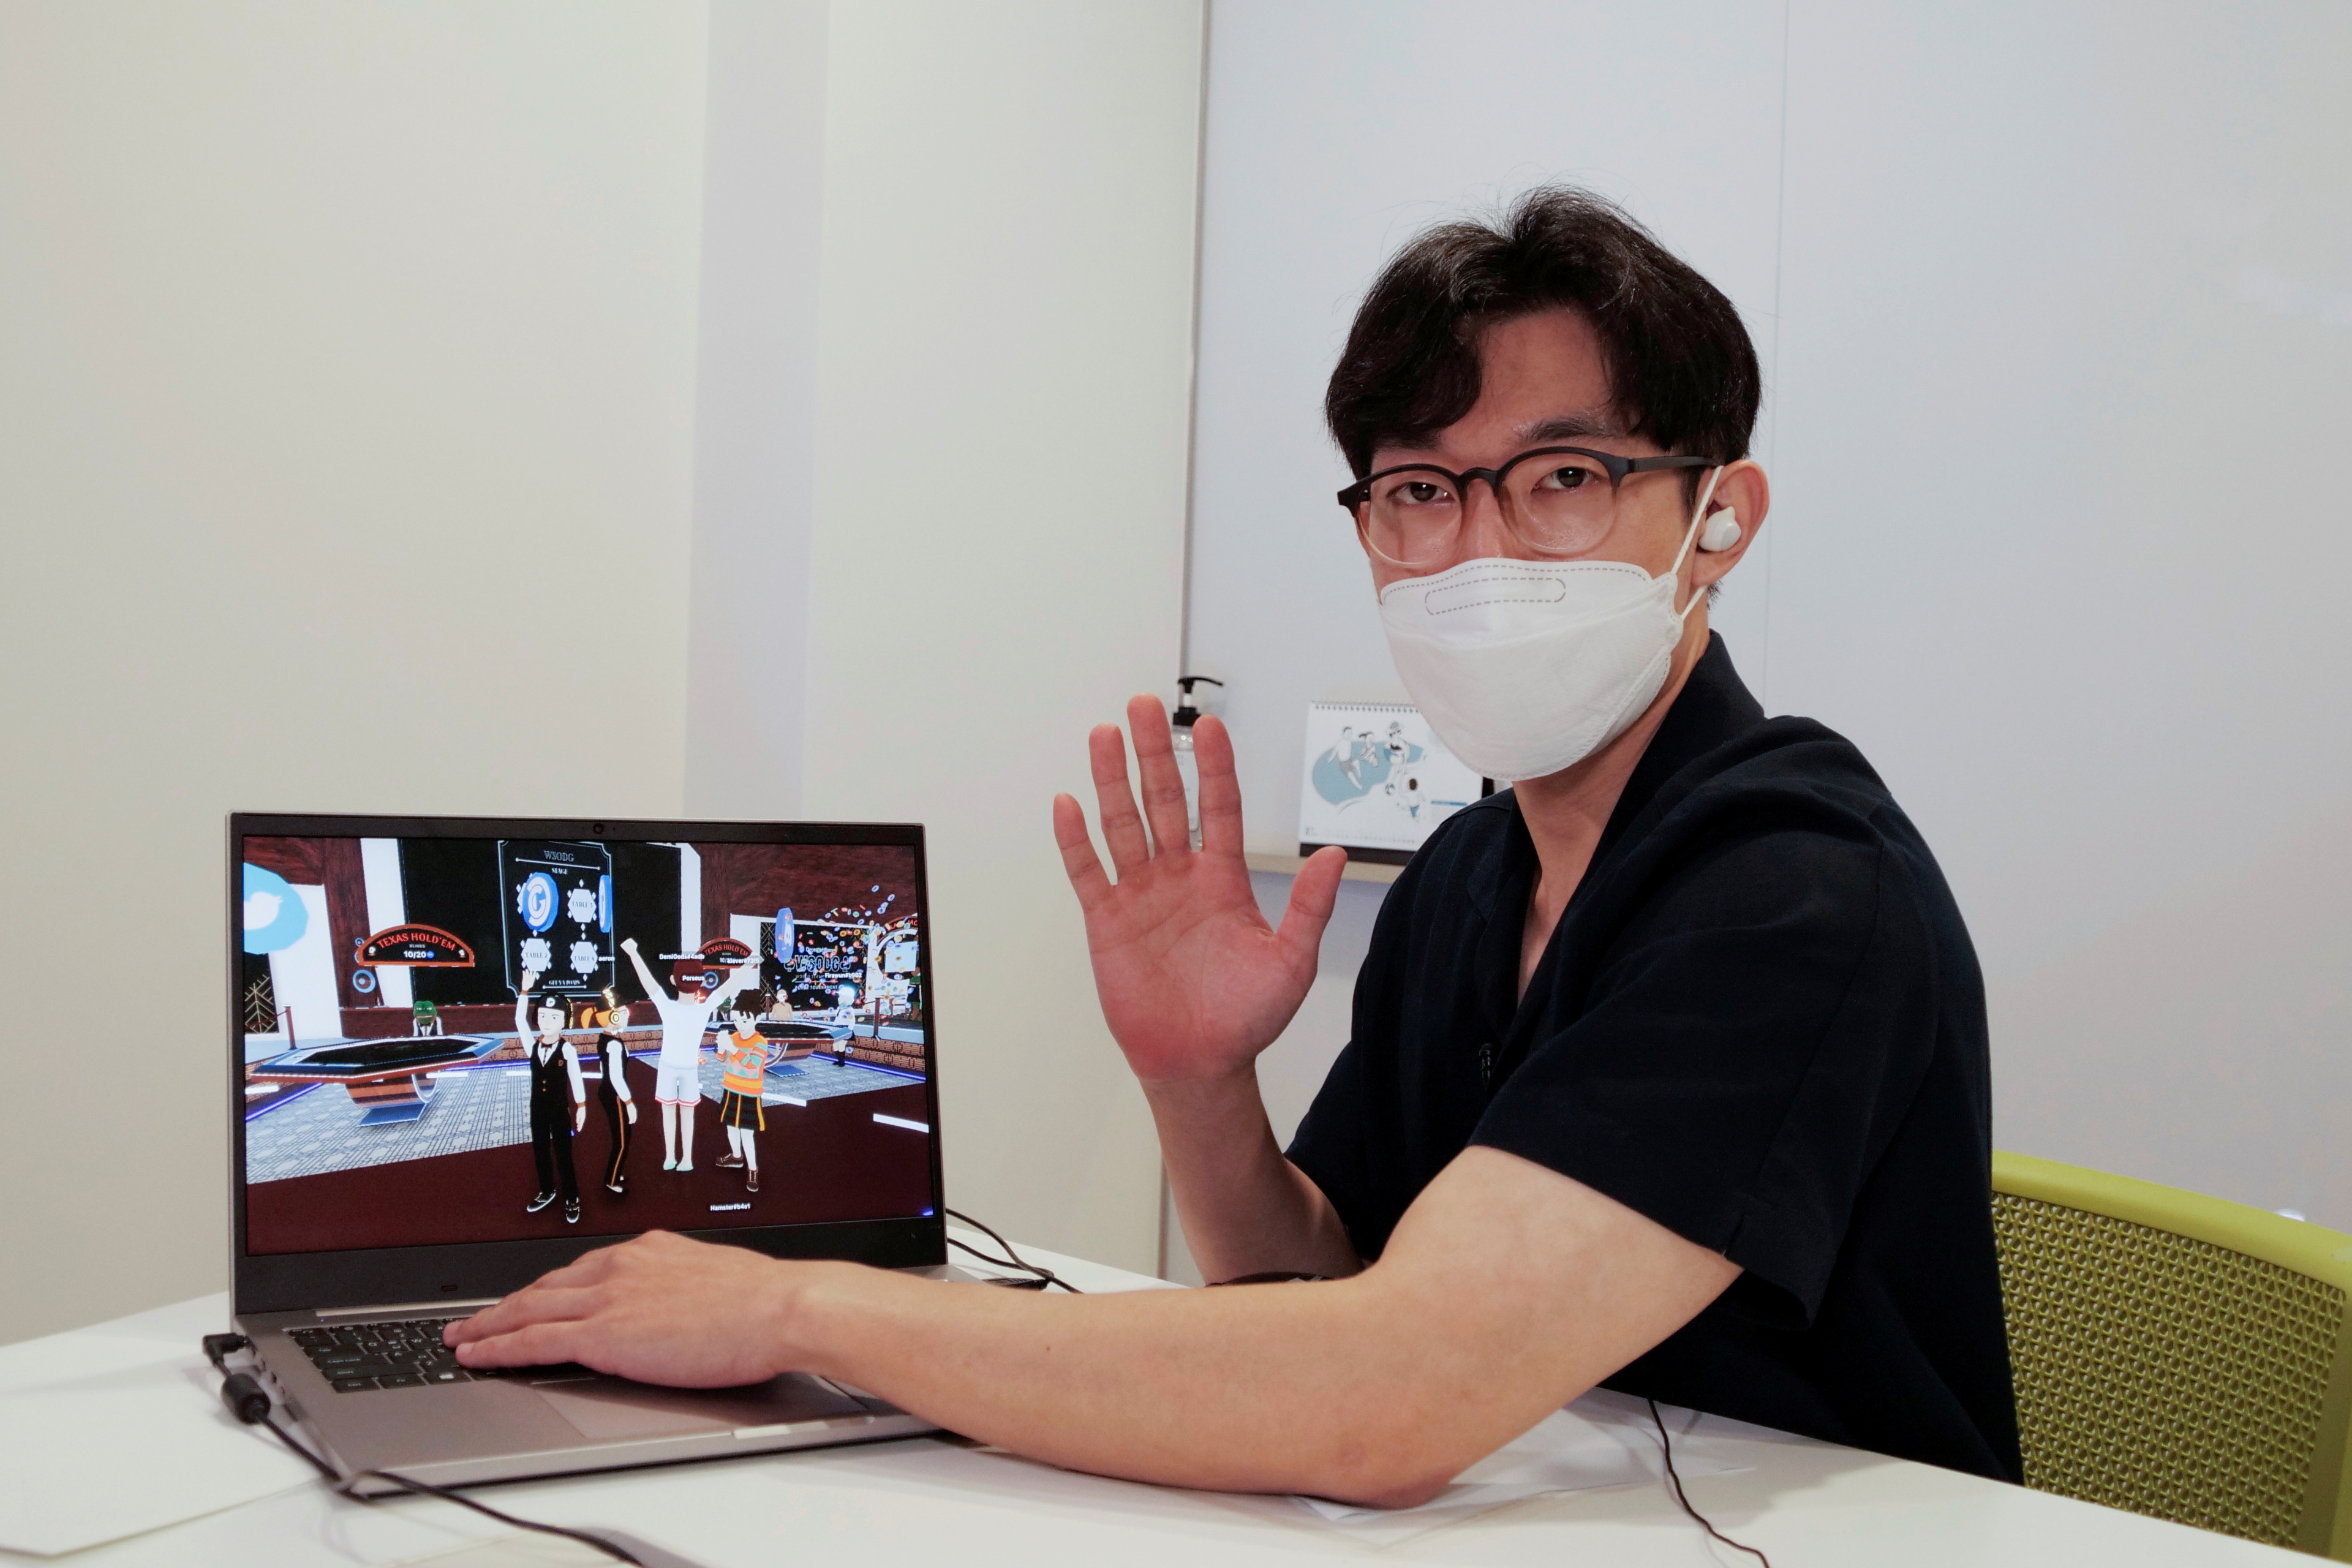 Shaun poses for photographs with a laptop showing his avatar in Decentraland in Seoul